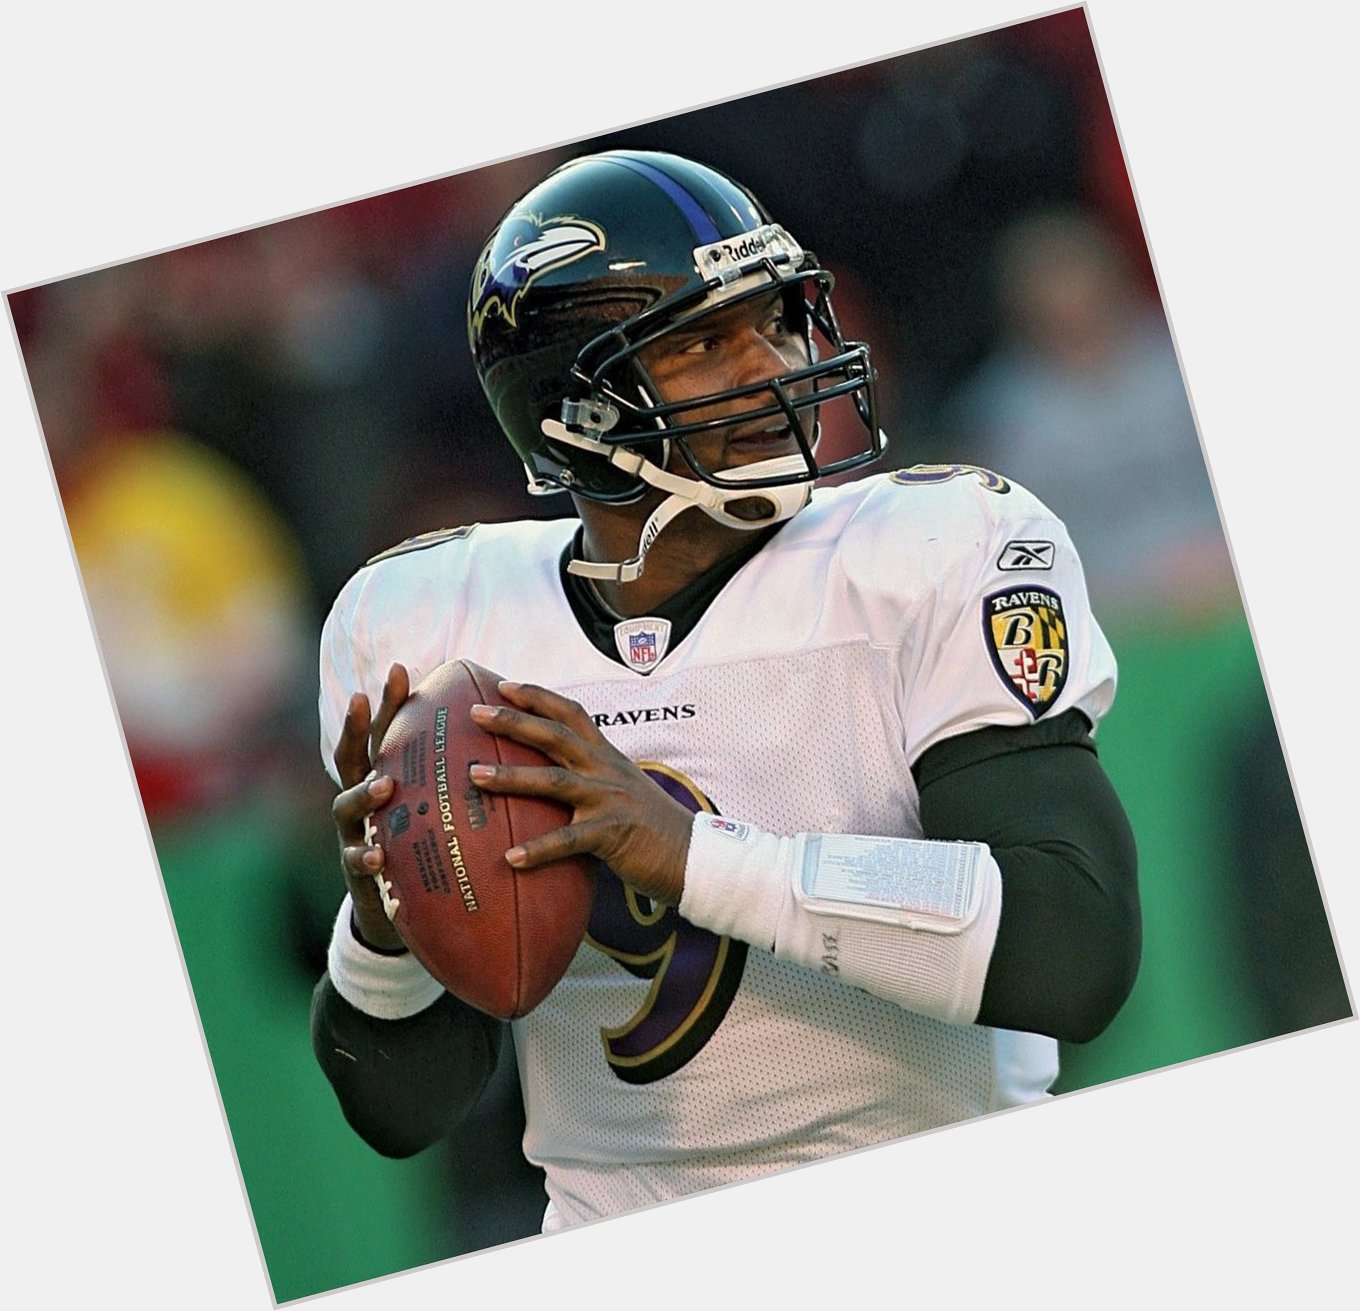 Happy Birthday to Steve McNair. He would have been 48 today.   